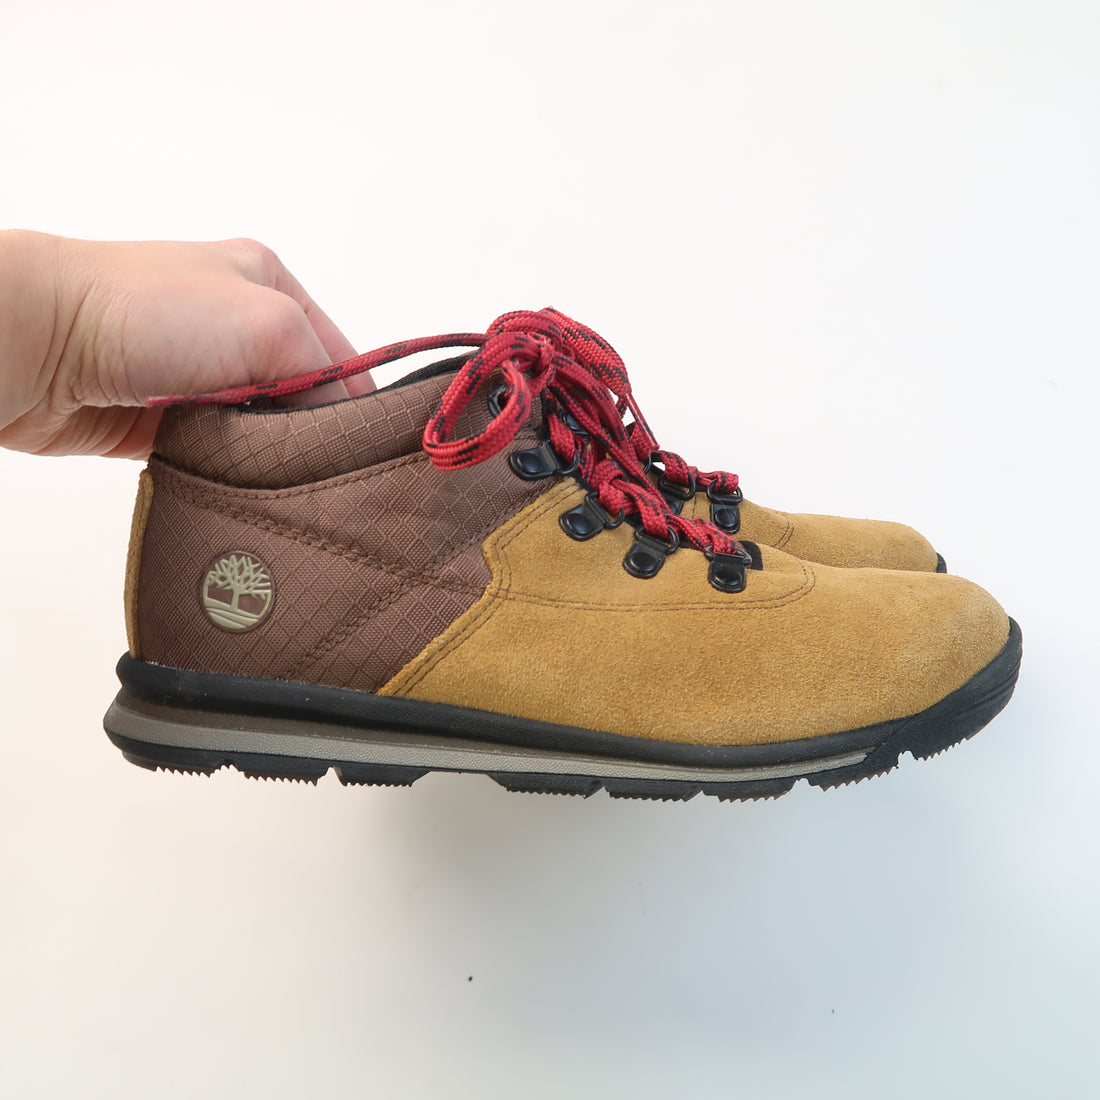 Timberland - Shoes (Shoes - Big Kid 3)